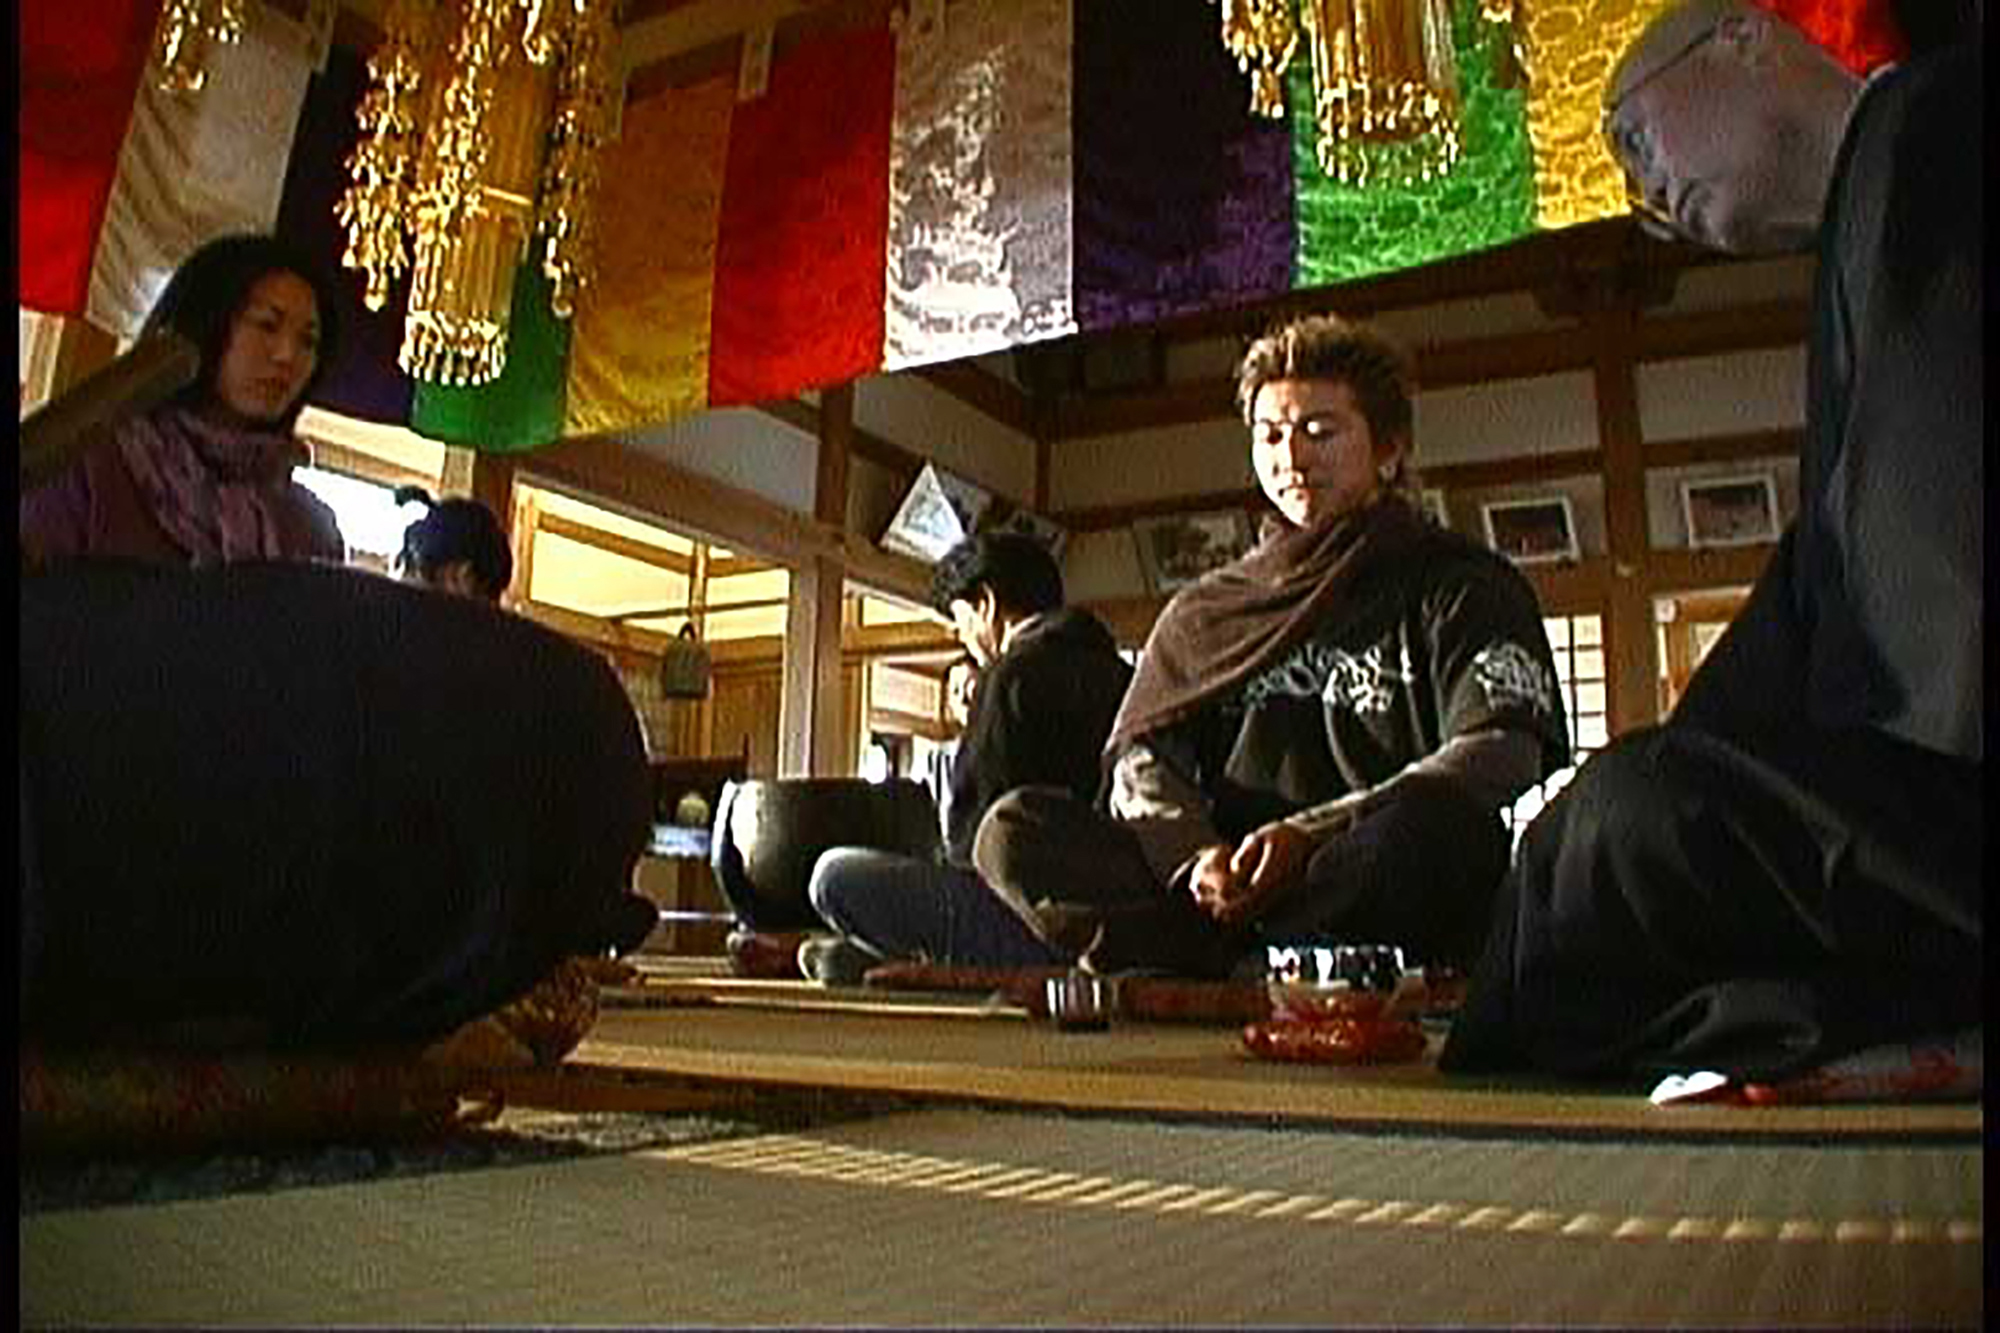 People in robes in a Zen Buddhist temple sitting on the floor.